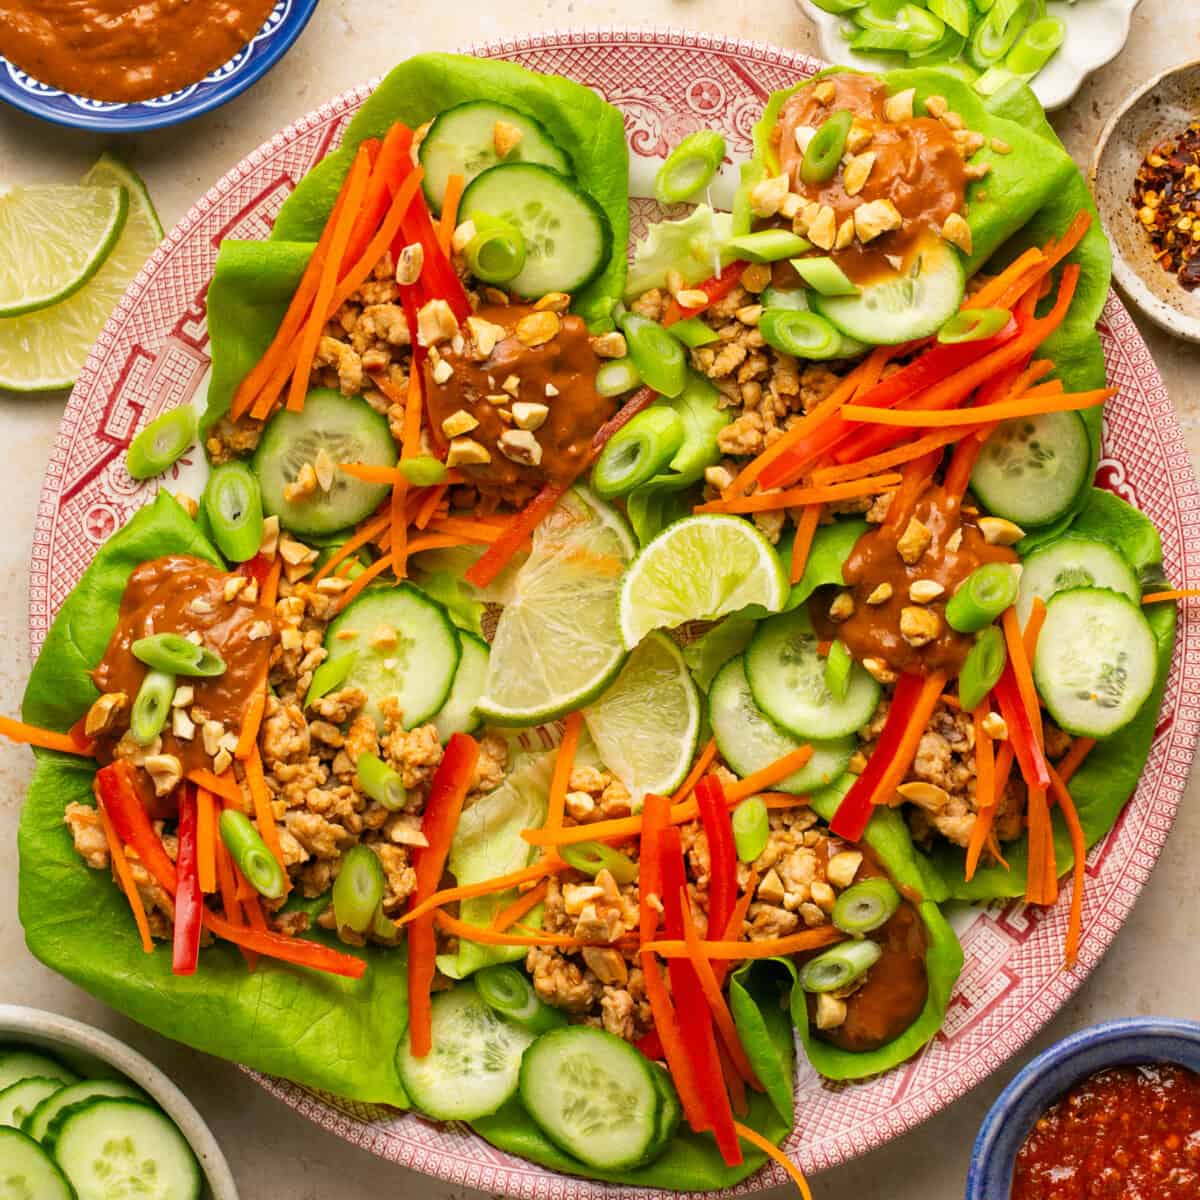 Plate full of assembled lettuce wraps with chicken, cucumbers, bell peppers, carrots, peanuts and extra peanut sauce on top.